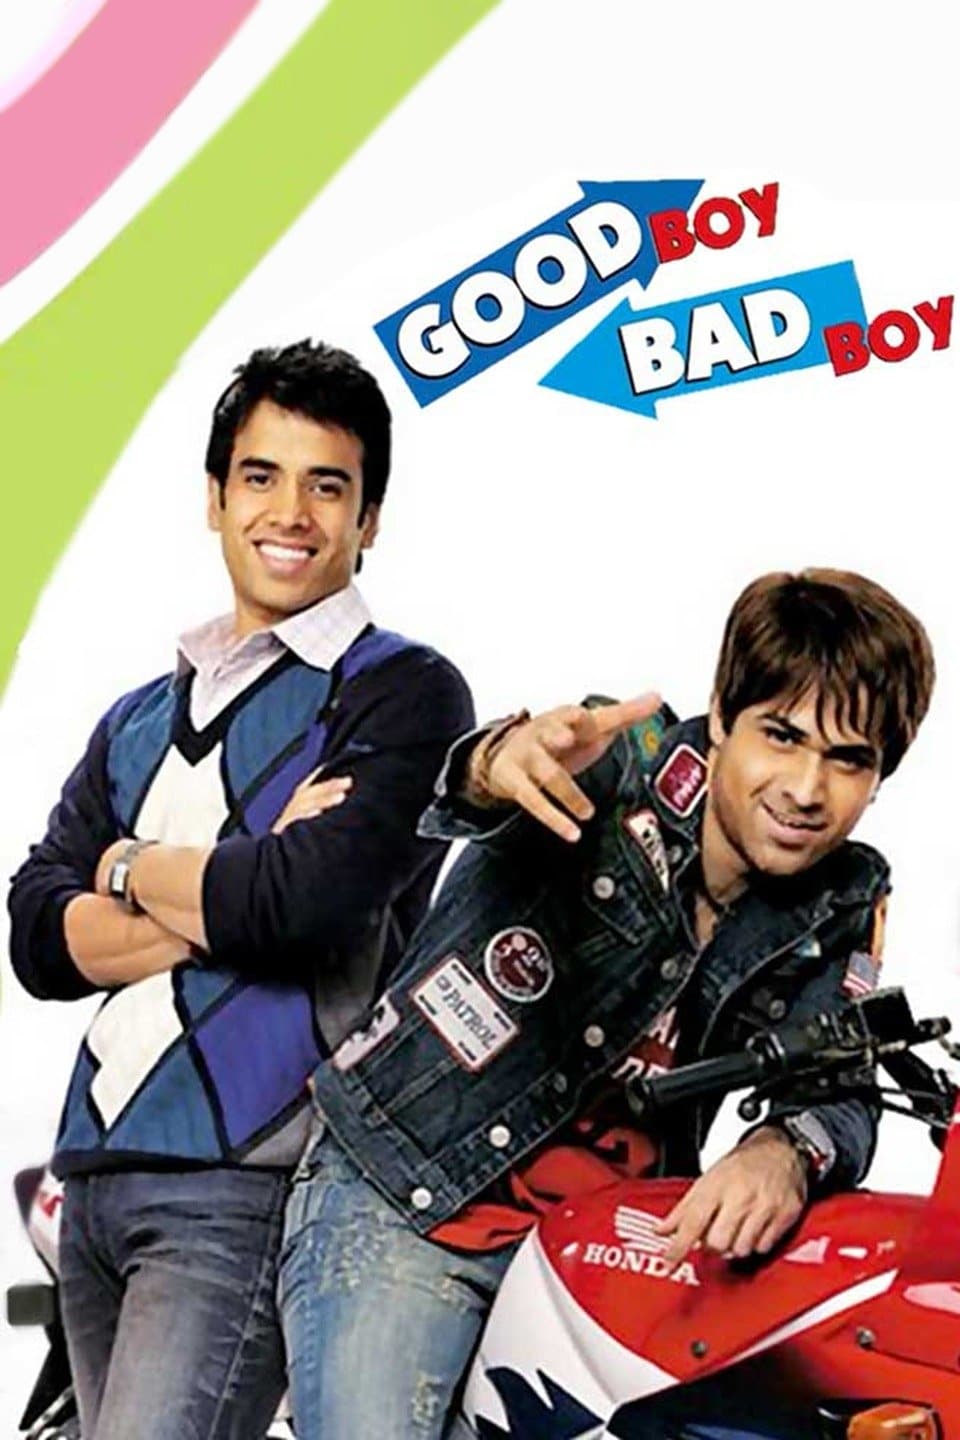 Poster for the movie "Good Boy, Bad Boy"